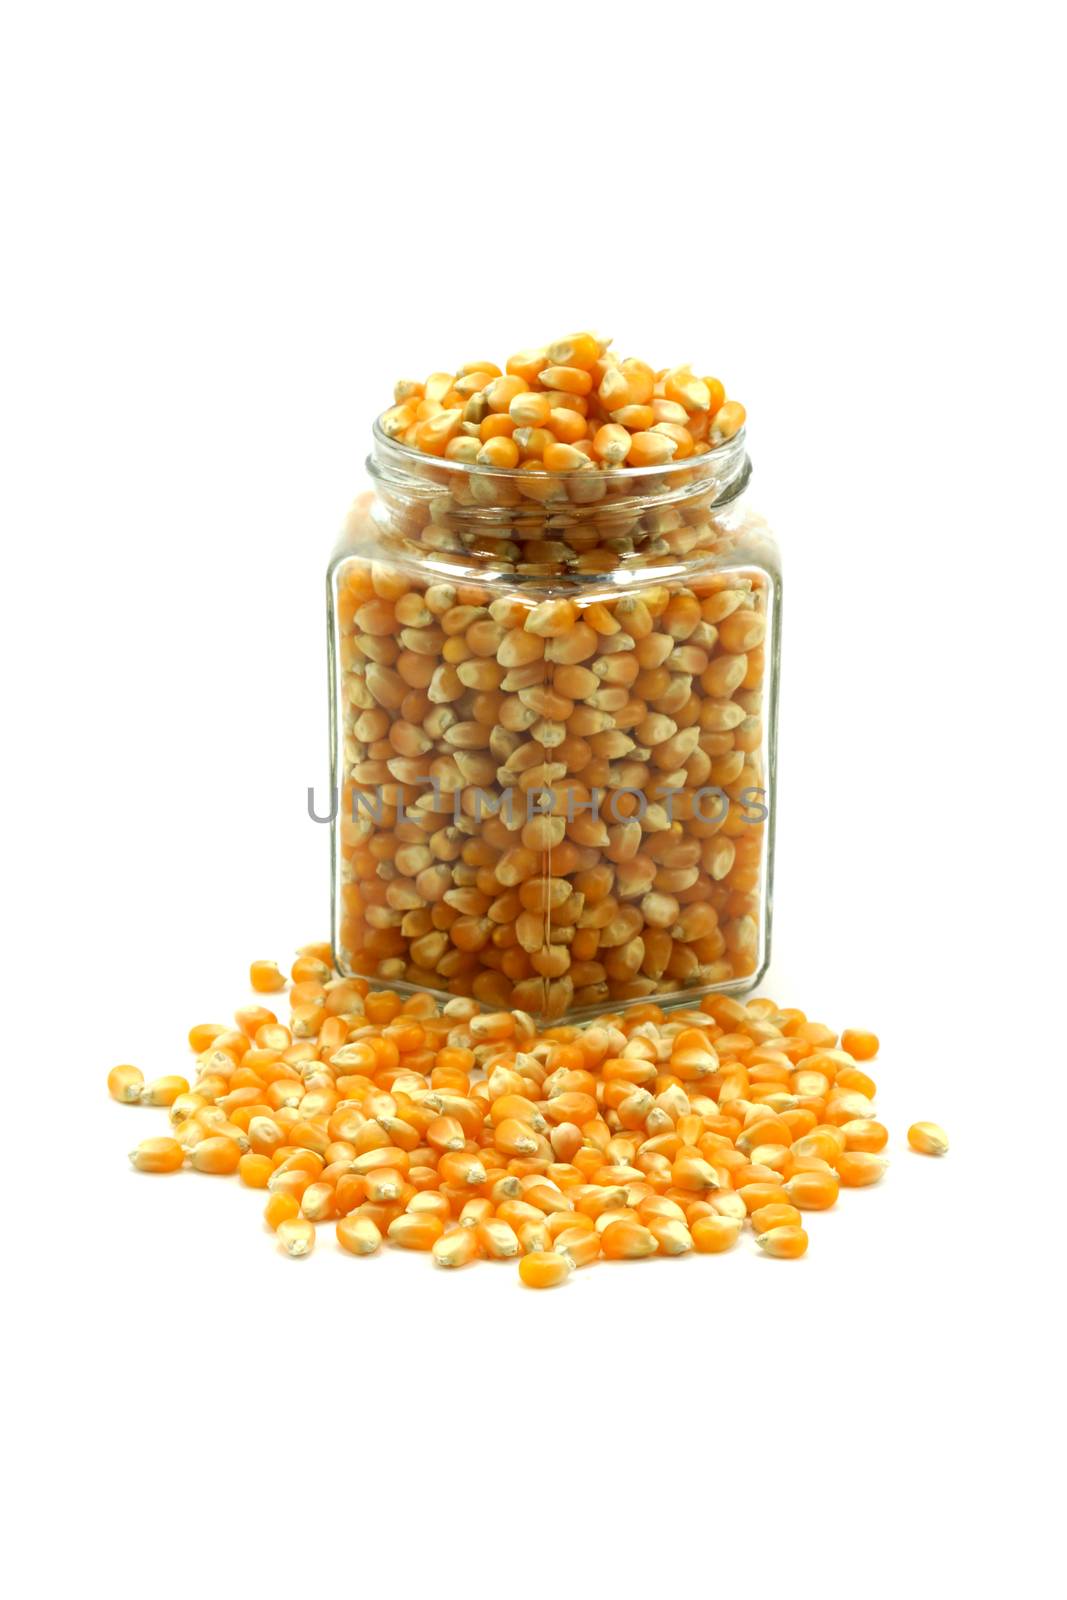 corn seeds for cooking popcorn